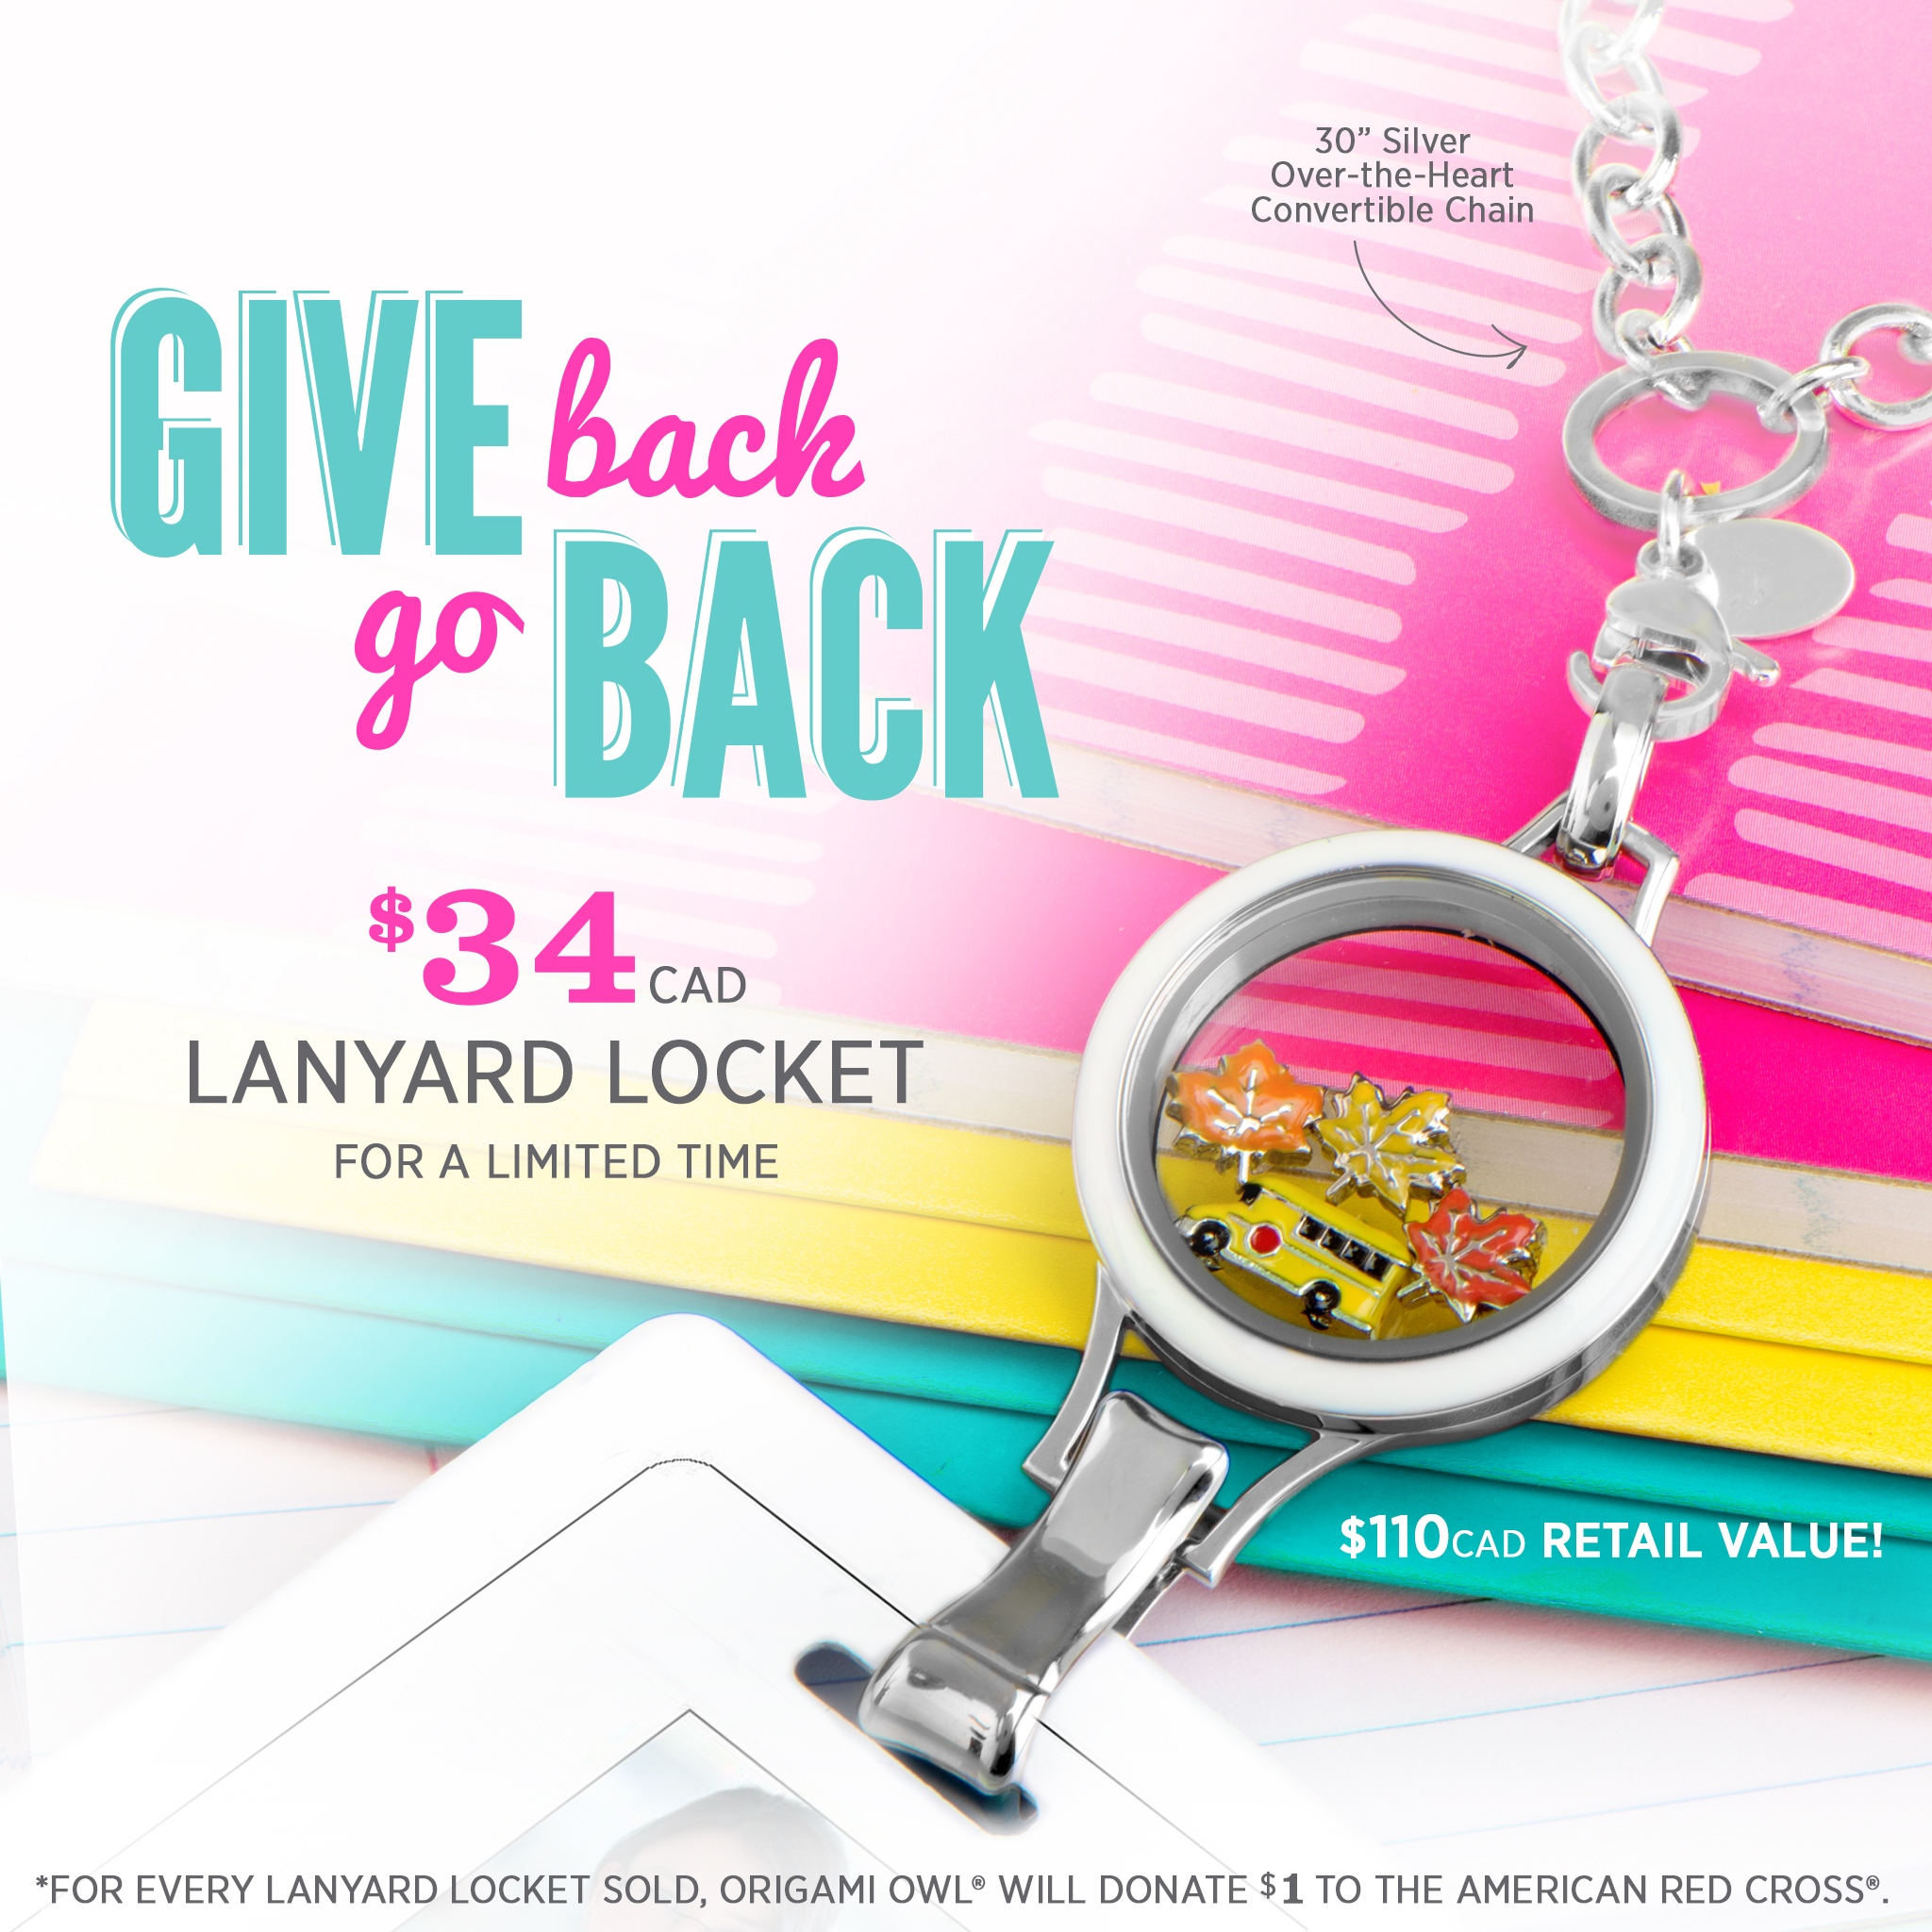 Origami Owl October Specials Your September Key Monthly Resources Origamiowlnews